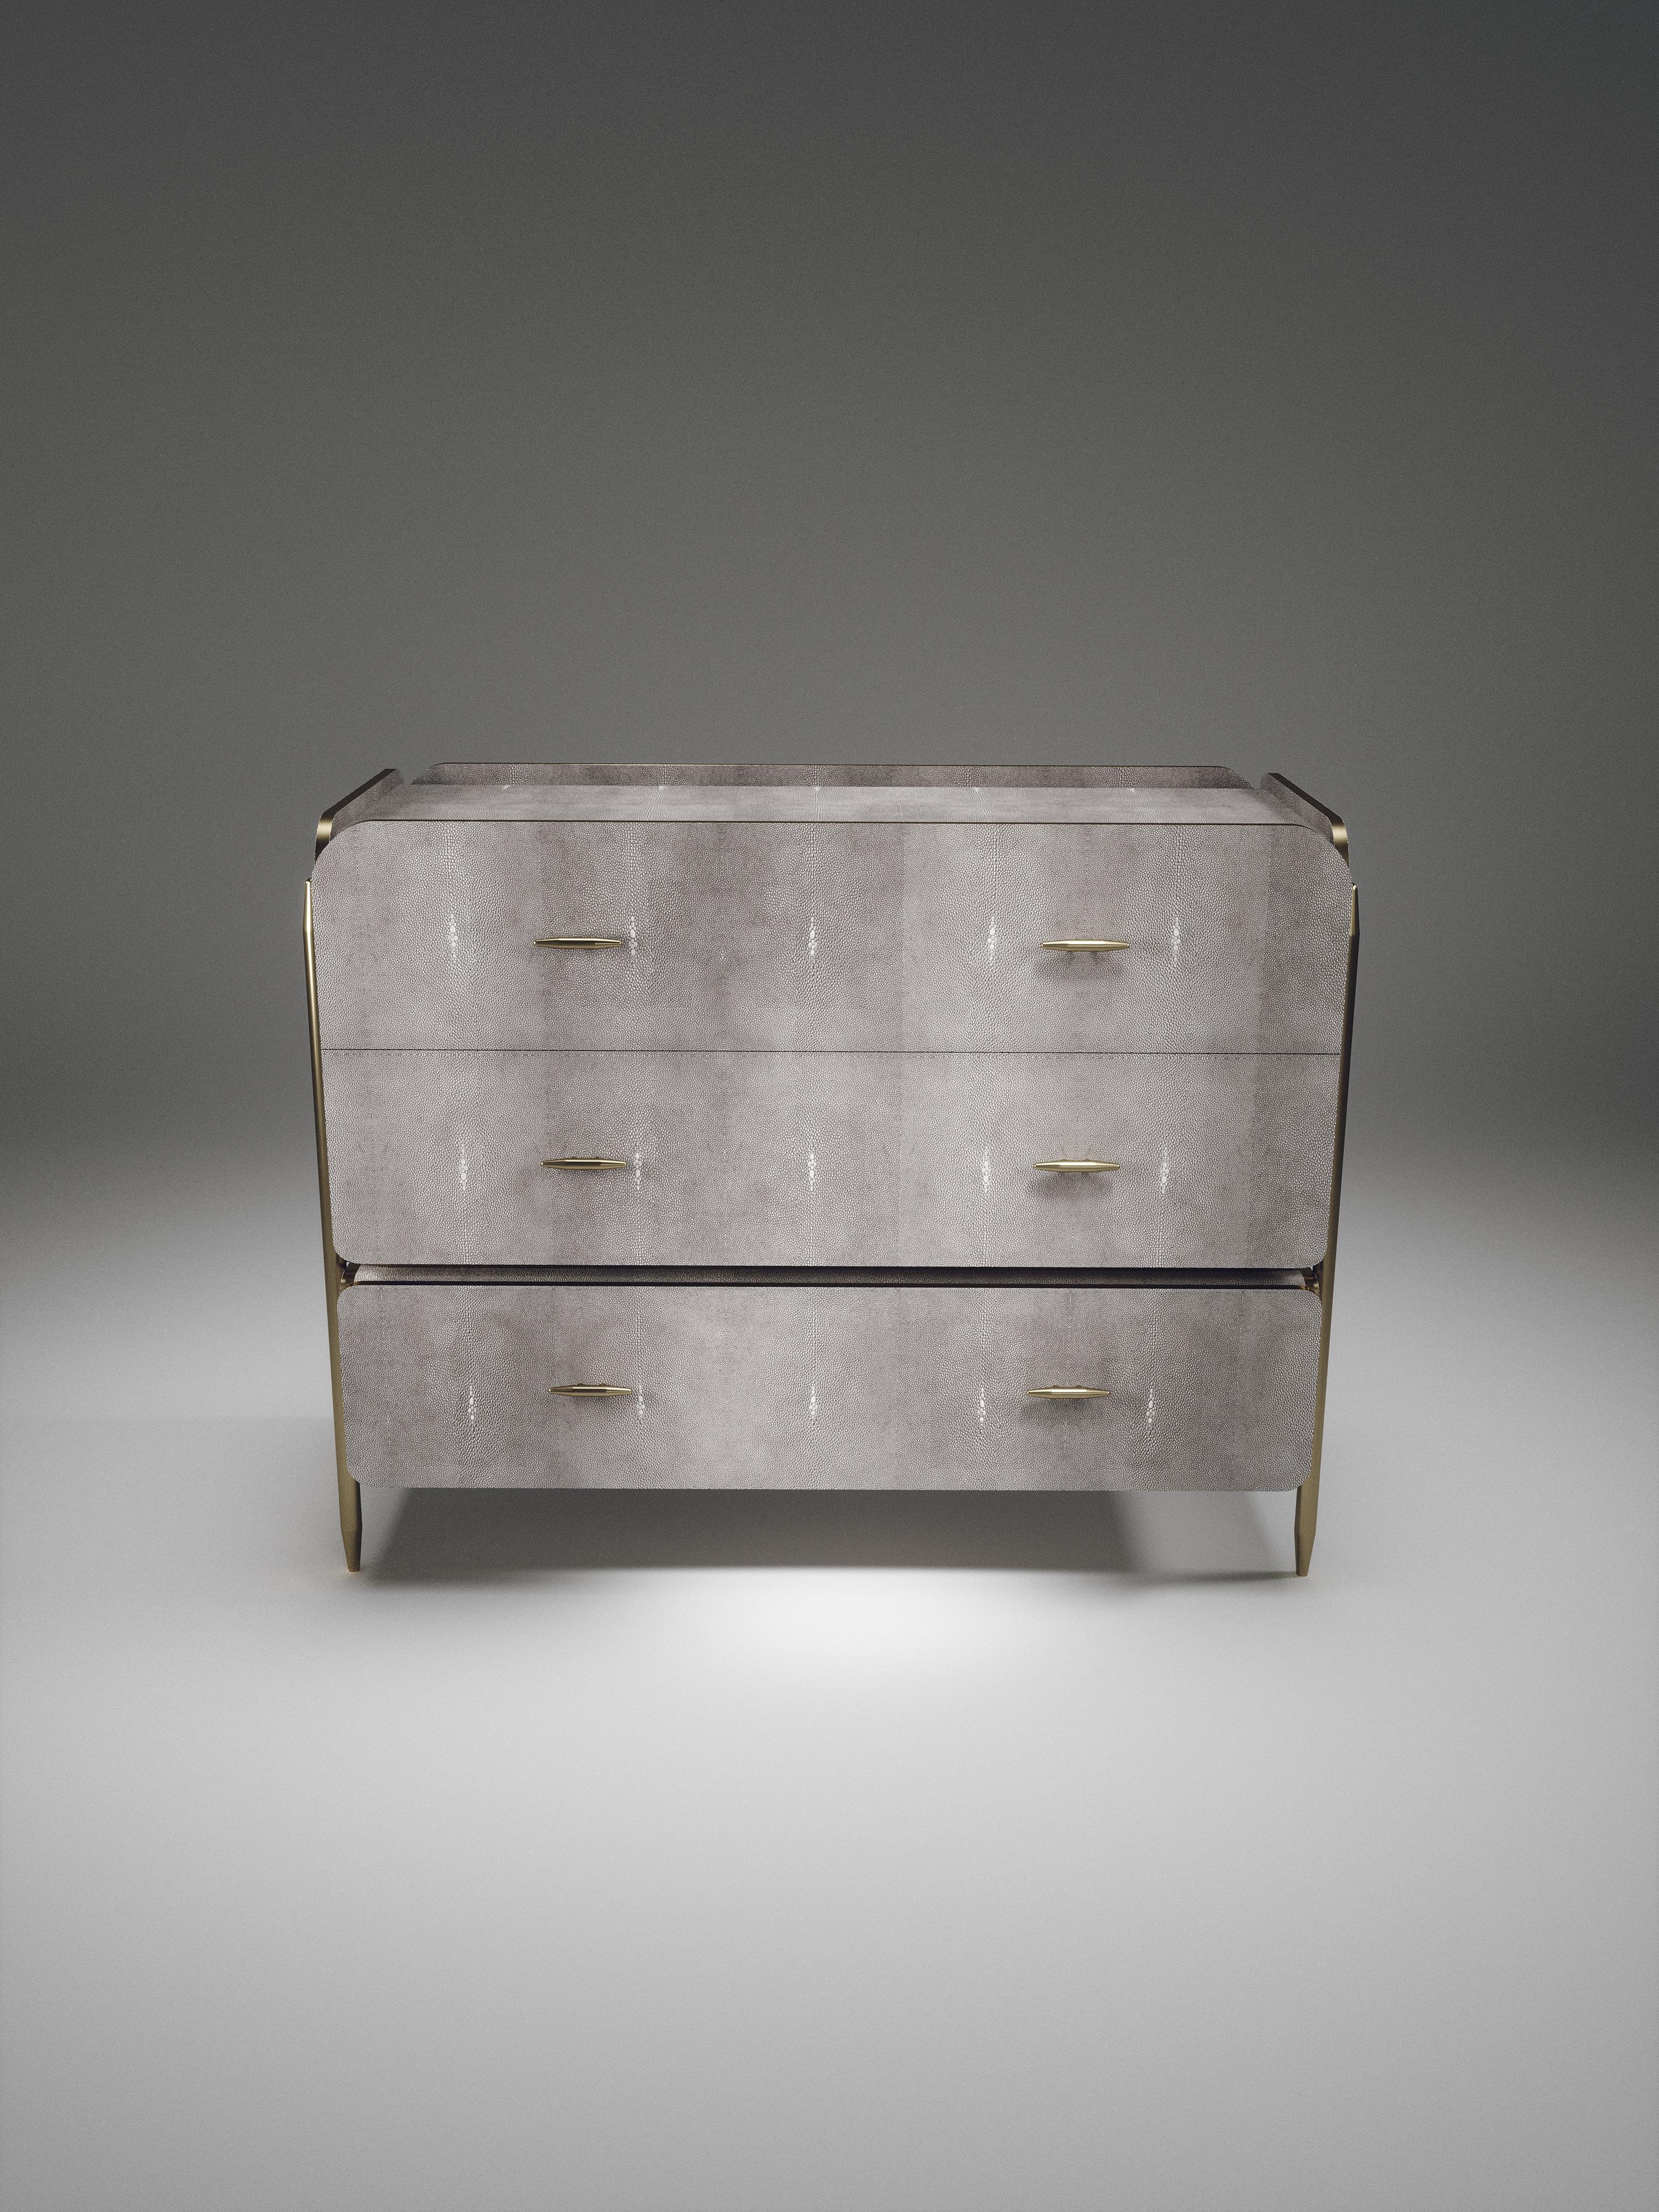 The Dandy Rectangle Chest of Drawers by Kifu Paris is an elegant and a luxurious home accent, inlaid in light grey shagreen with bronze-patina brass details. This piece includes 3 drawers total and the interiors are inlaid in gemelina wood veneer.